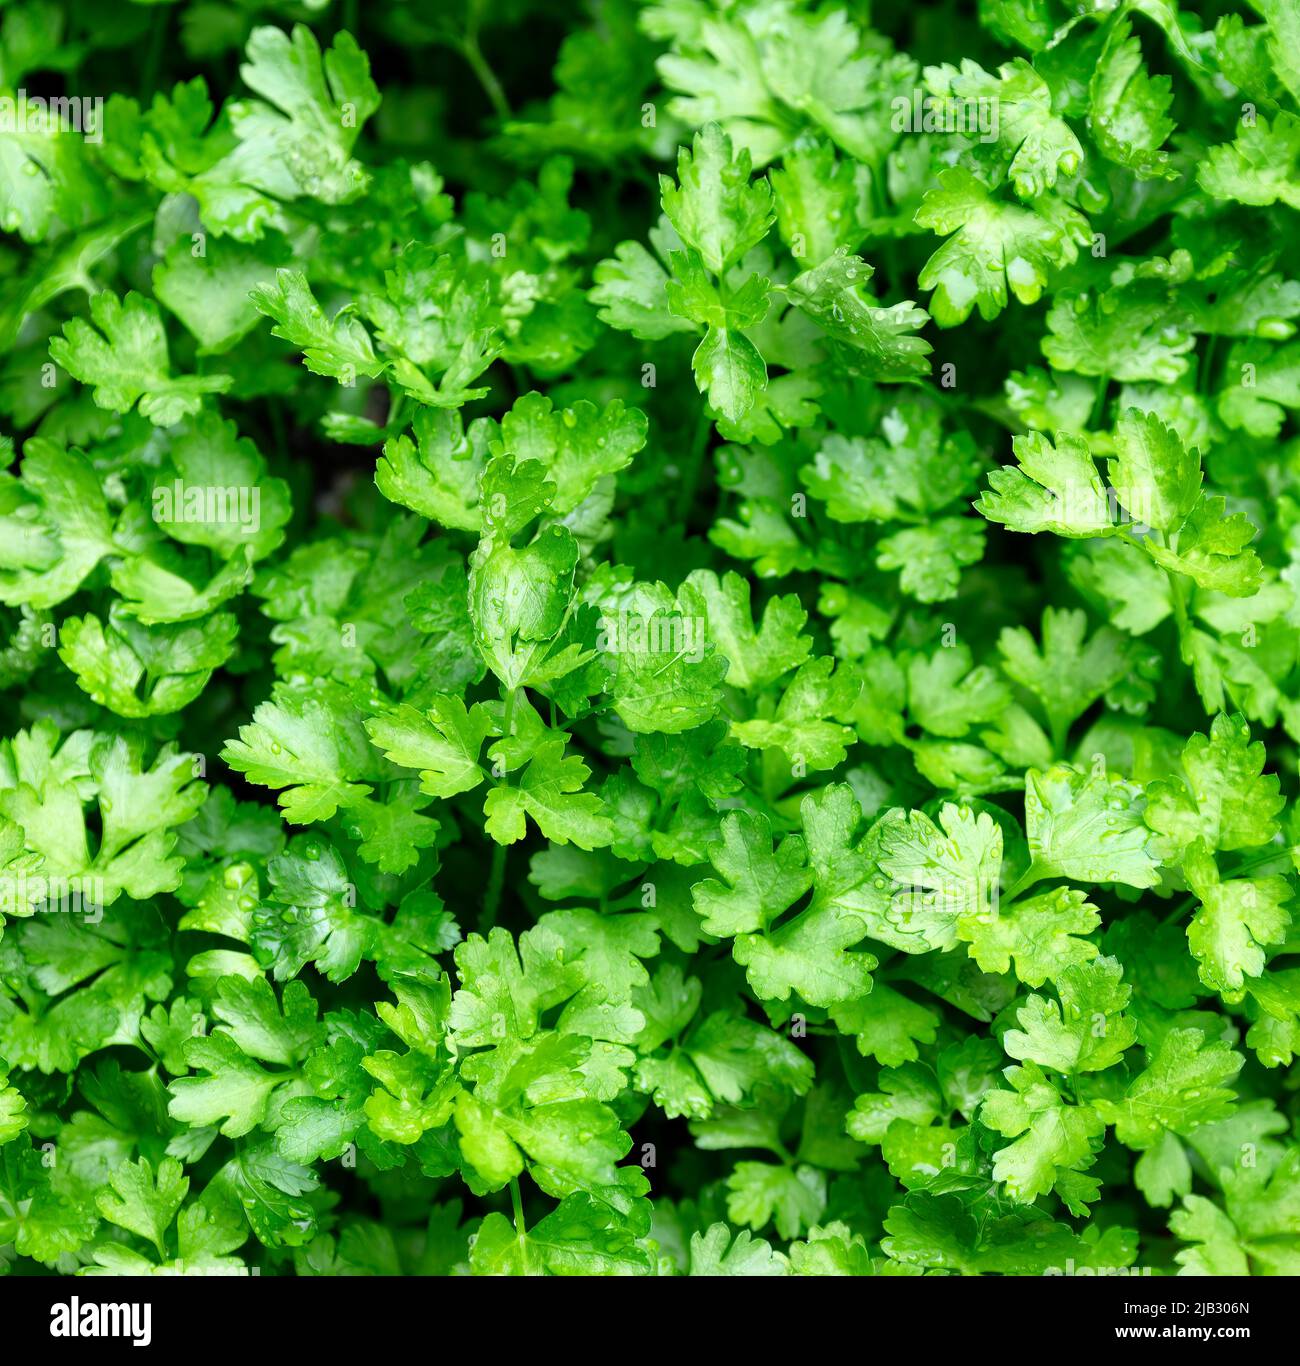 Garden of organic Italian flat leaf green parsley leaves in filled frame close up view Stock Photo